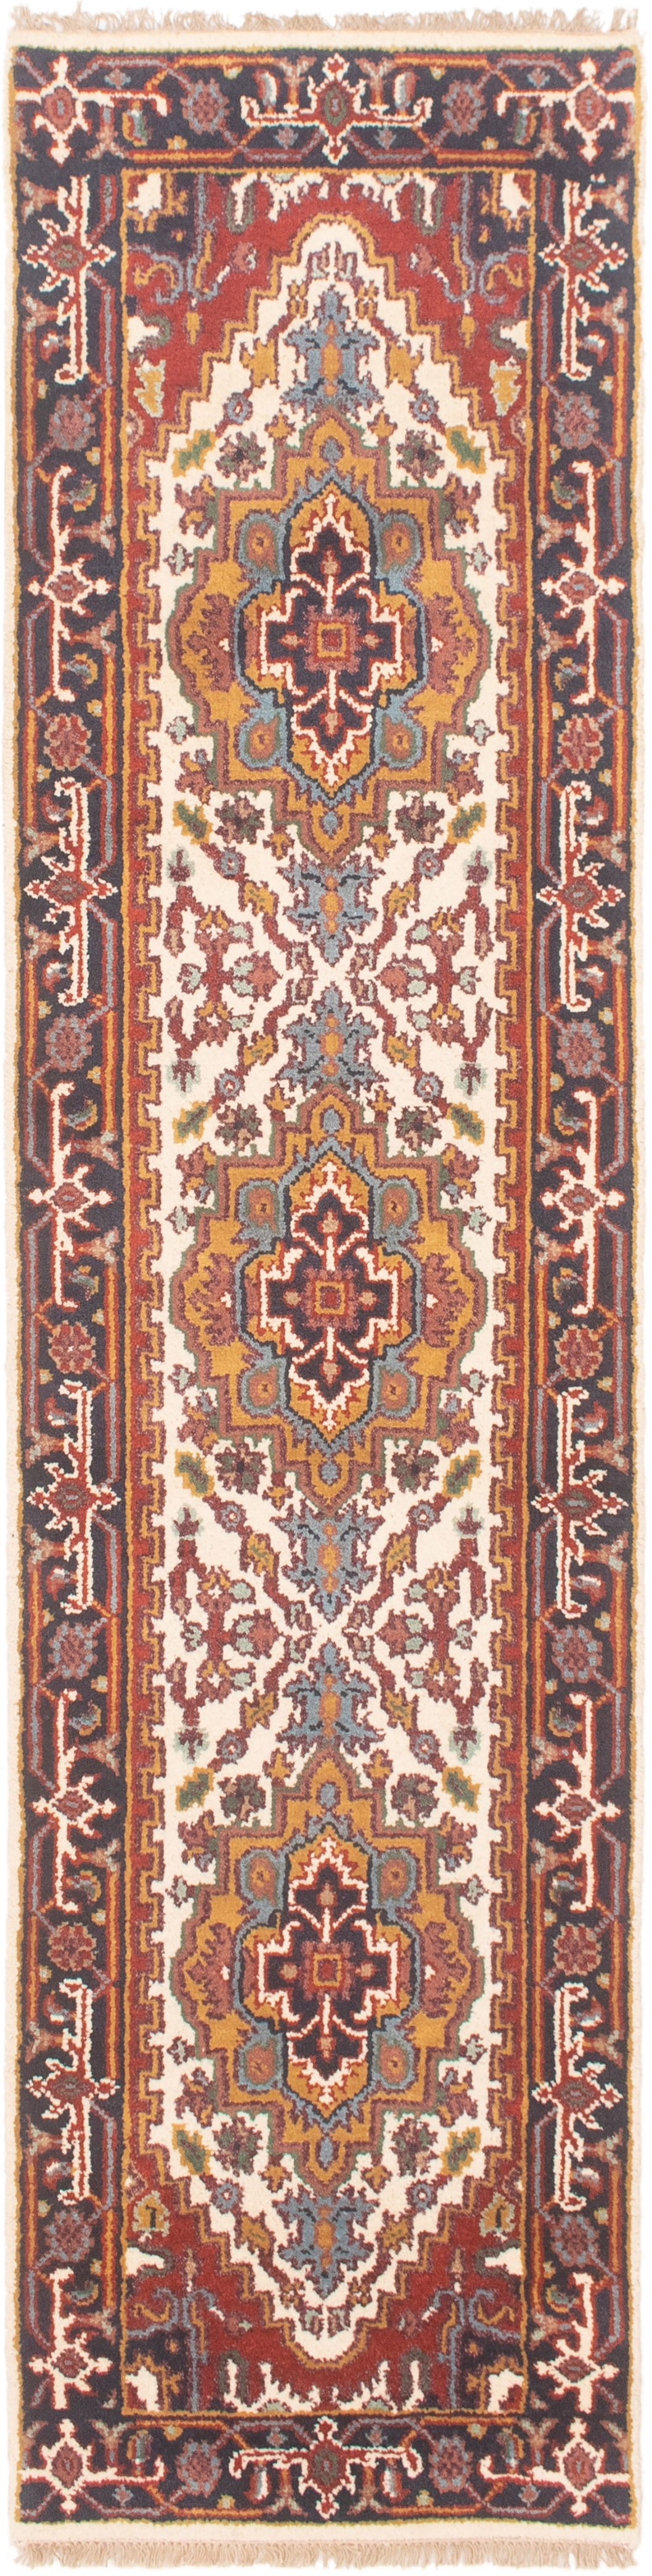 Hand-knotted Serapi Heritage Cream Wool Rug 2'6" x 9'9"  Size: 2'6" x 9'9"  